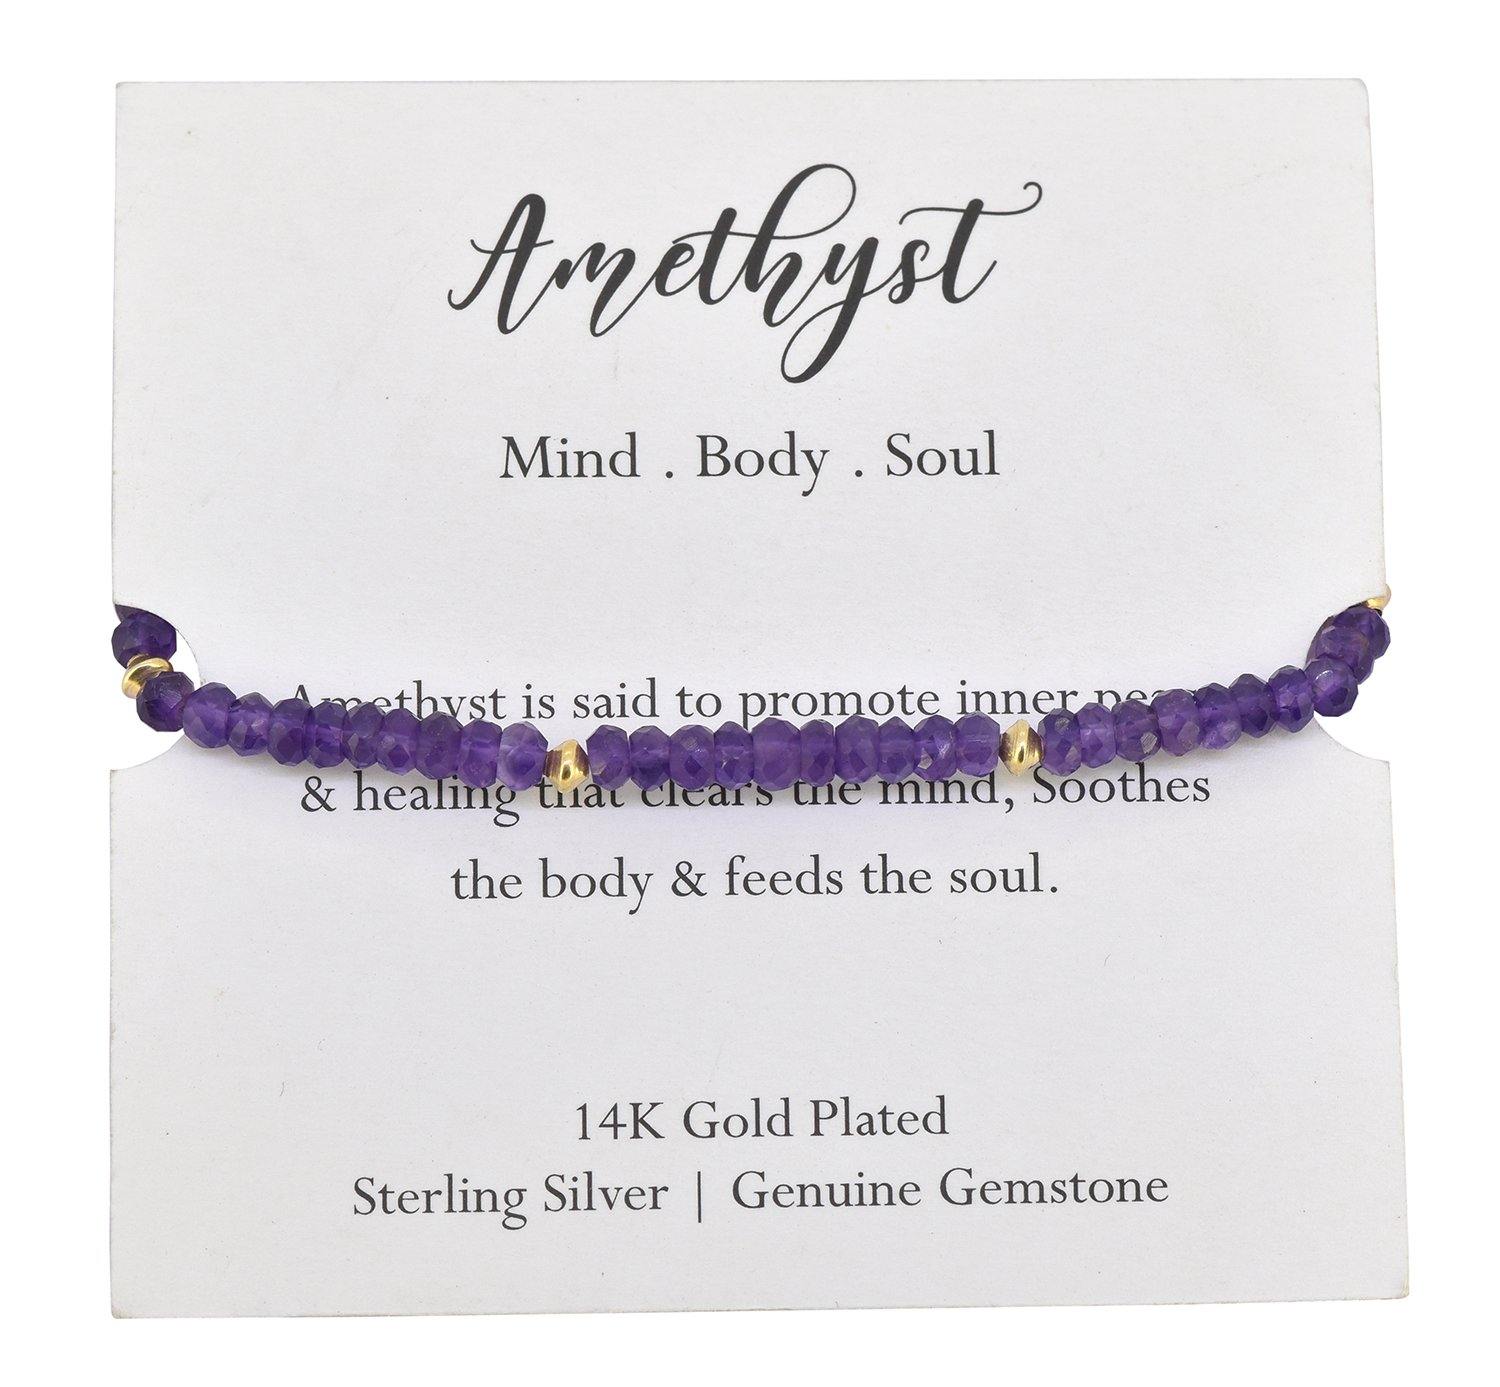 Amethyst Solid 925 Sterling Silver Gold Plated Link Chain Bracelet 8" - YoTreasure